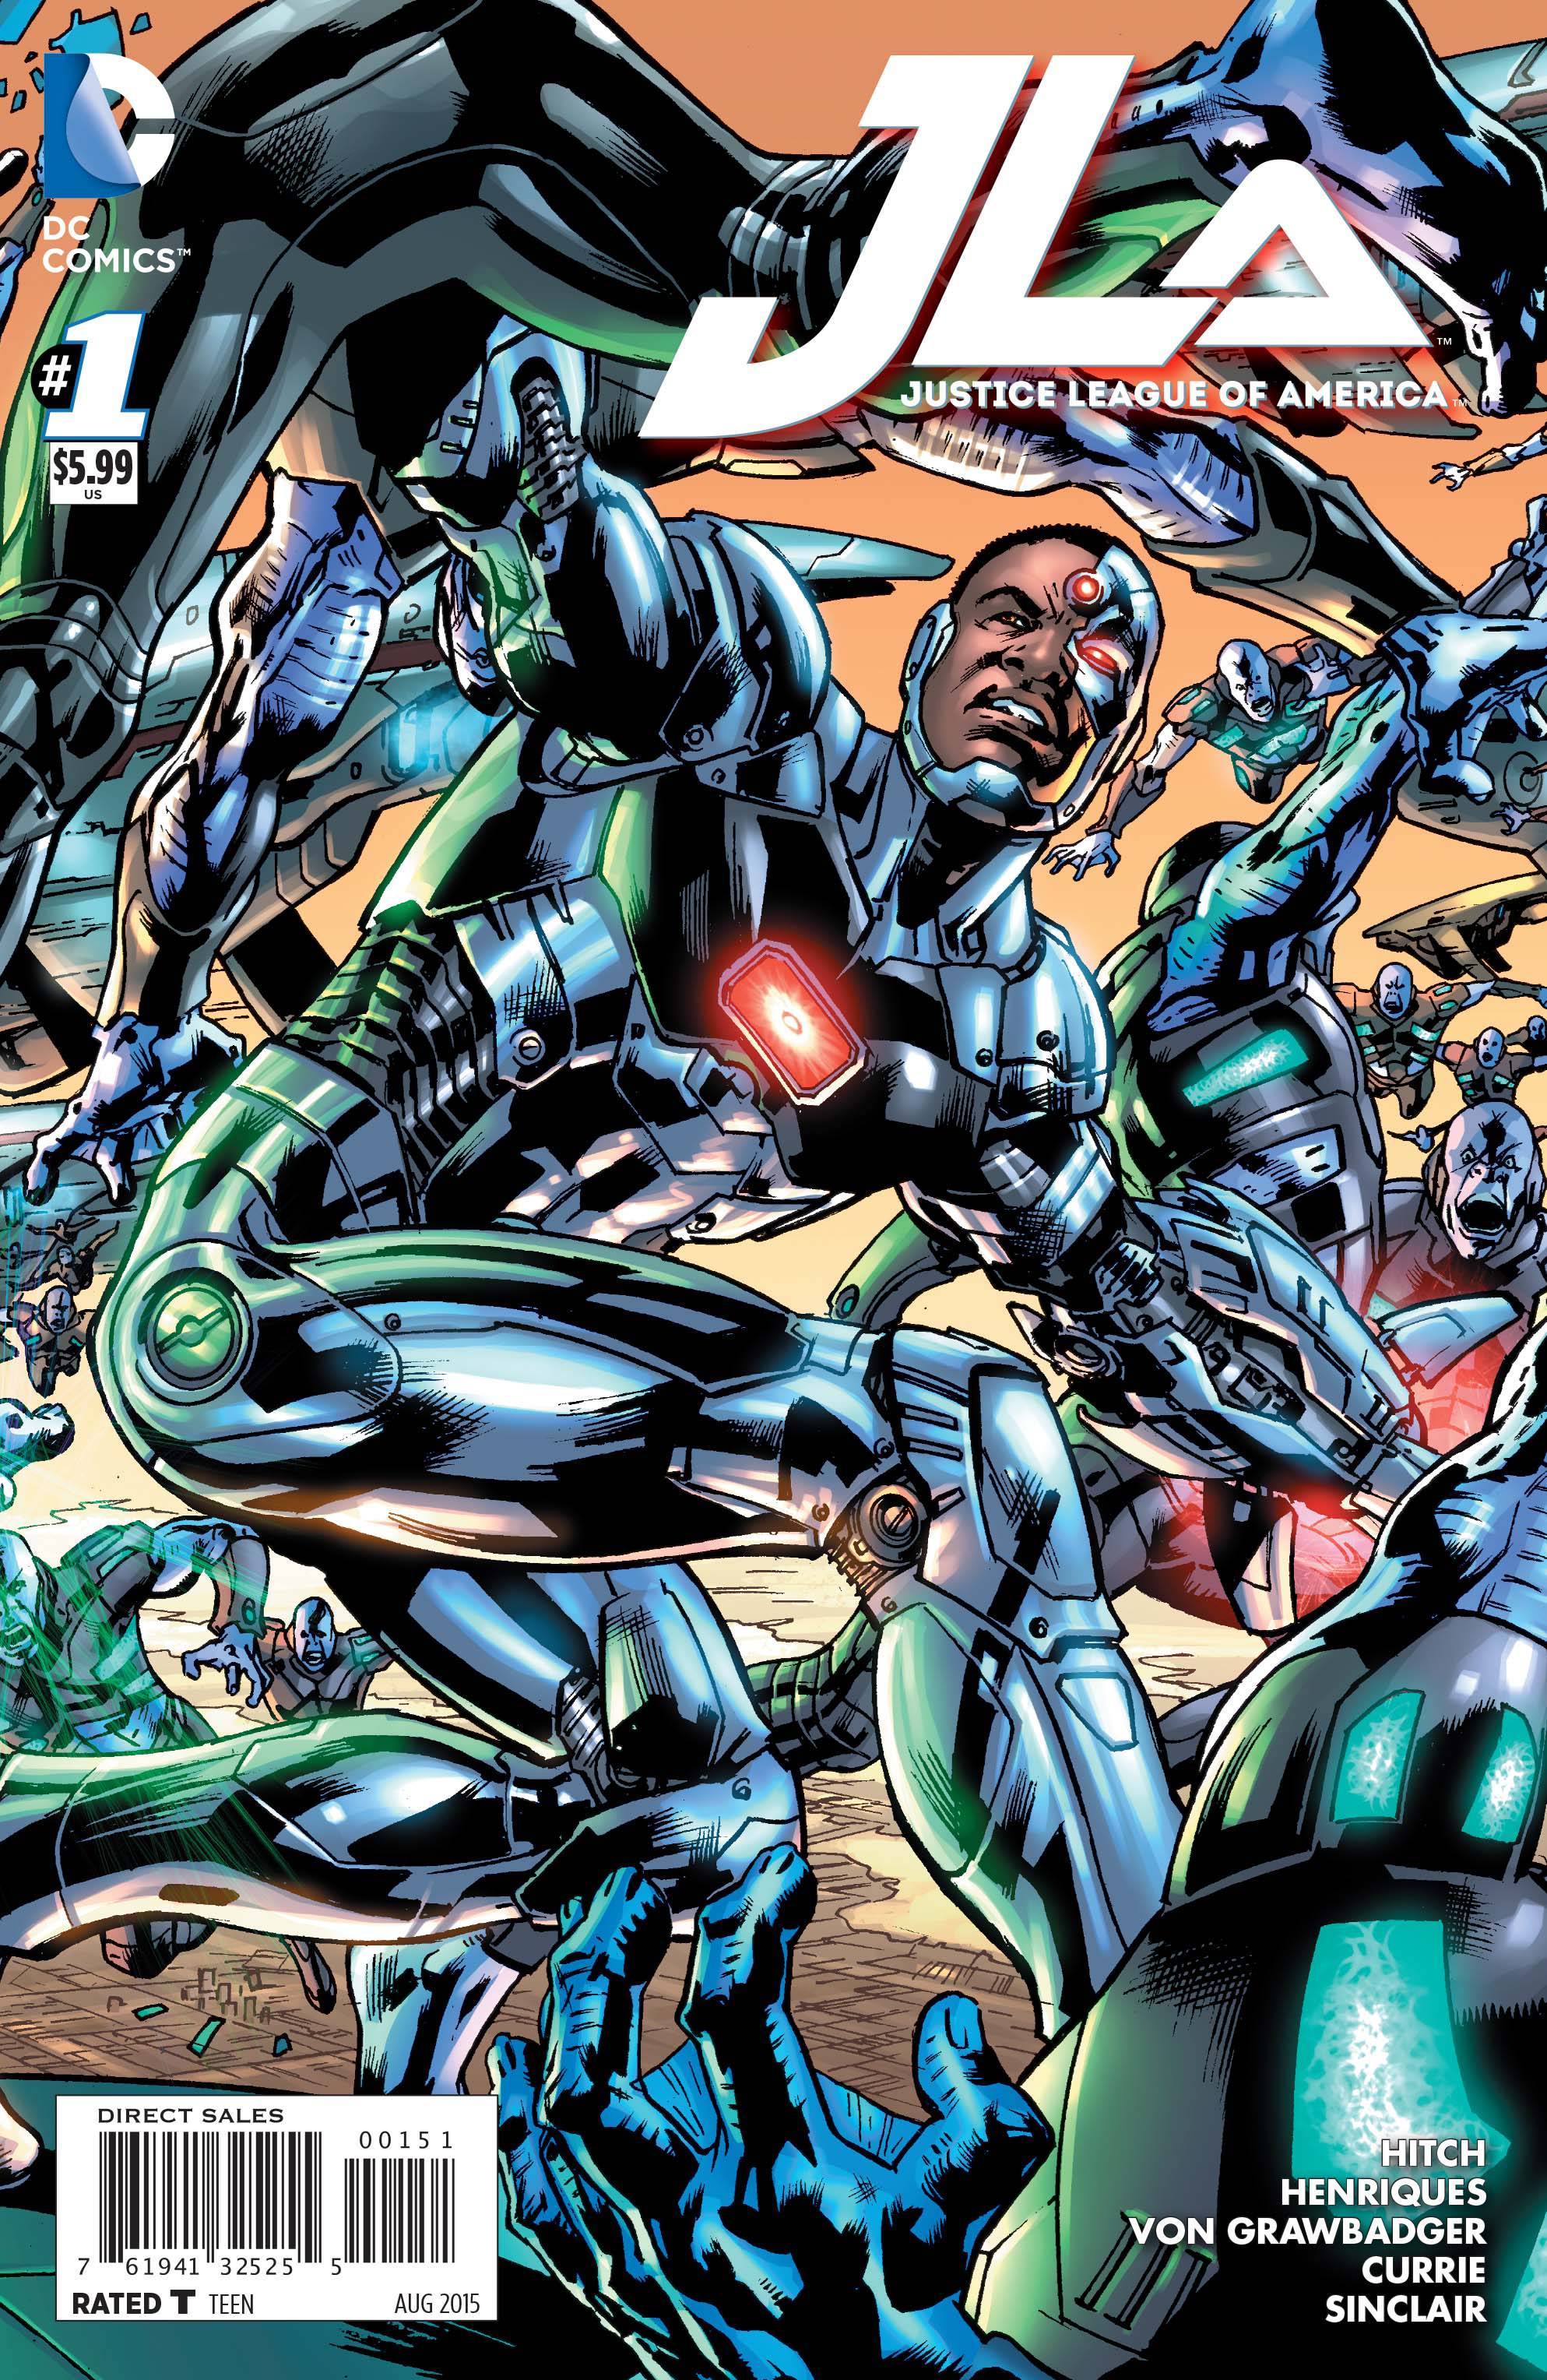 Justice League of America #1 Cyborg Variant Edition (2015)